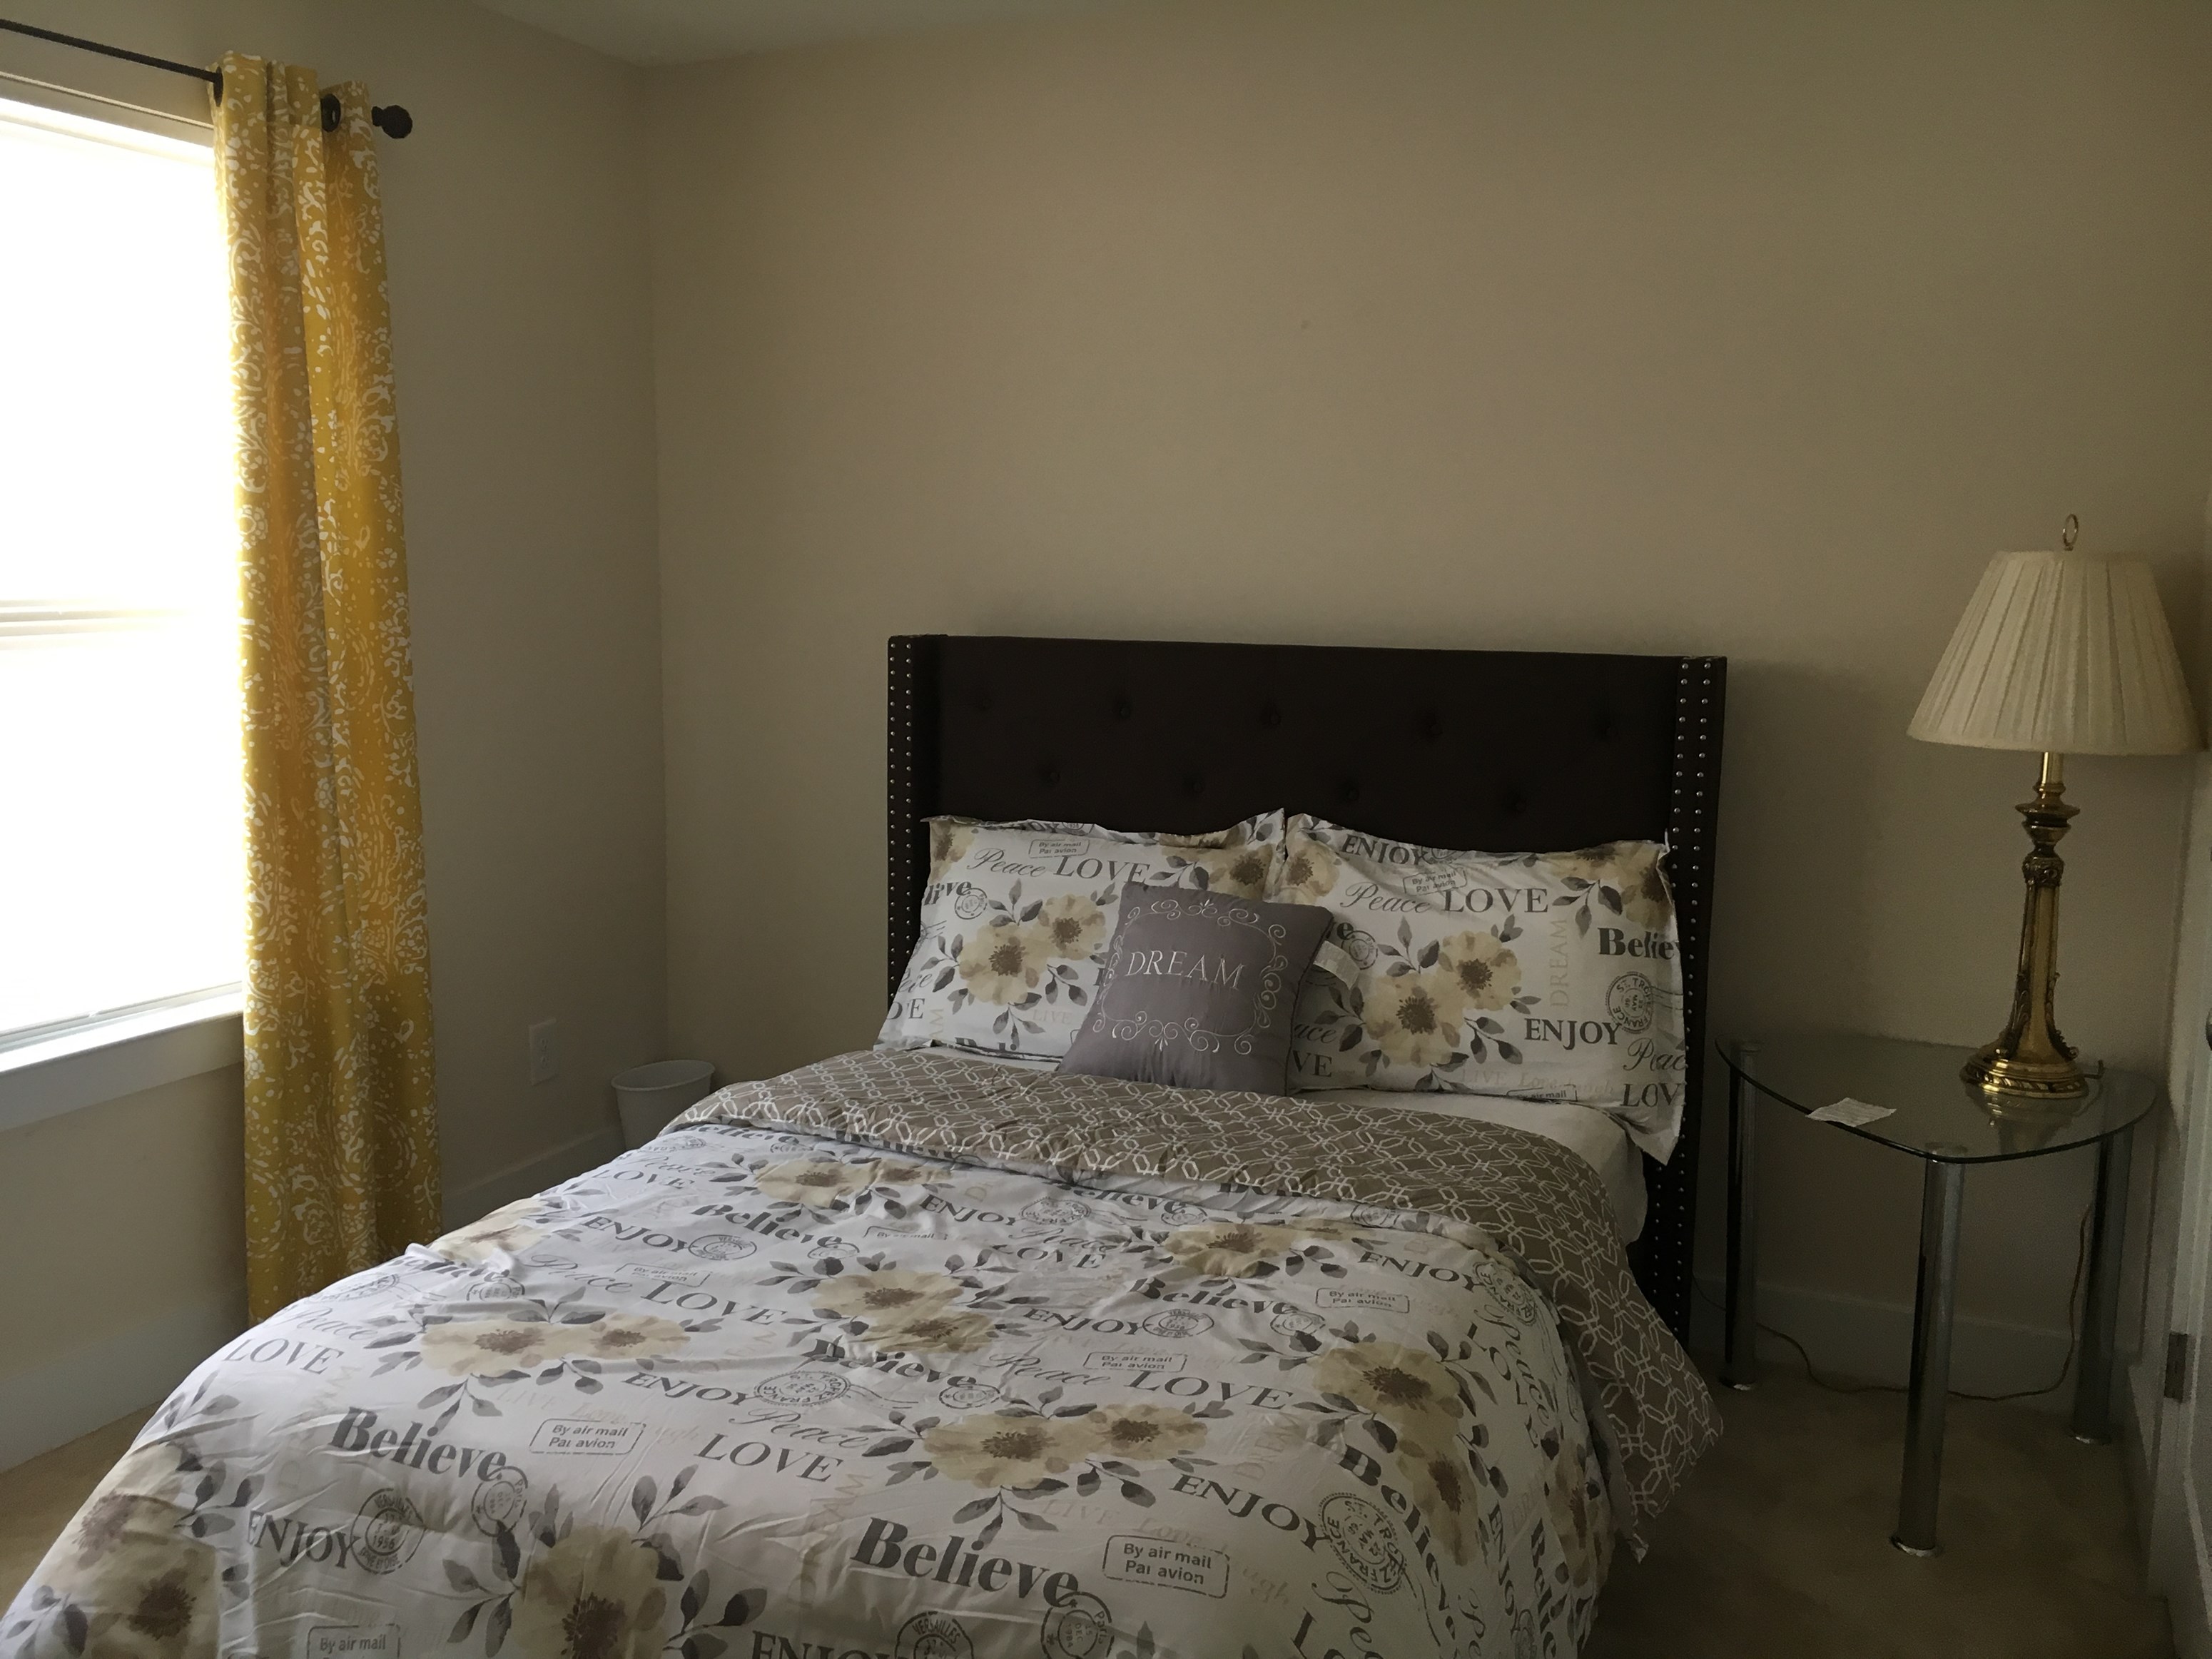 Furnished Bedroom For Rent In A Upscale Neighborhood Near